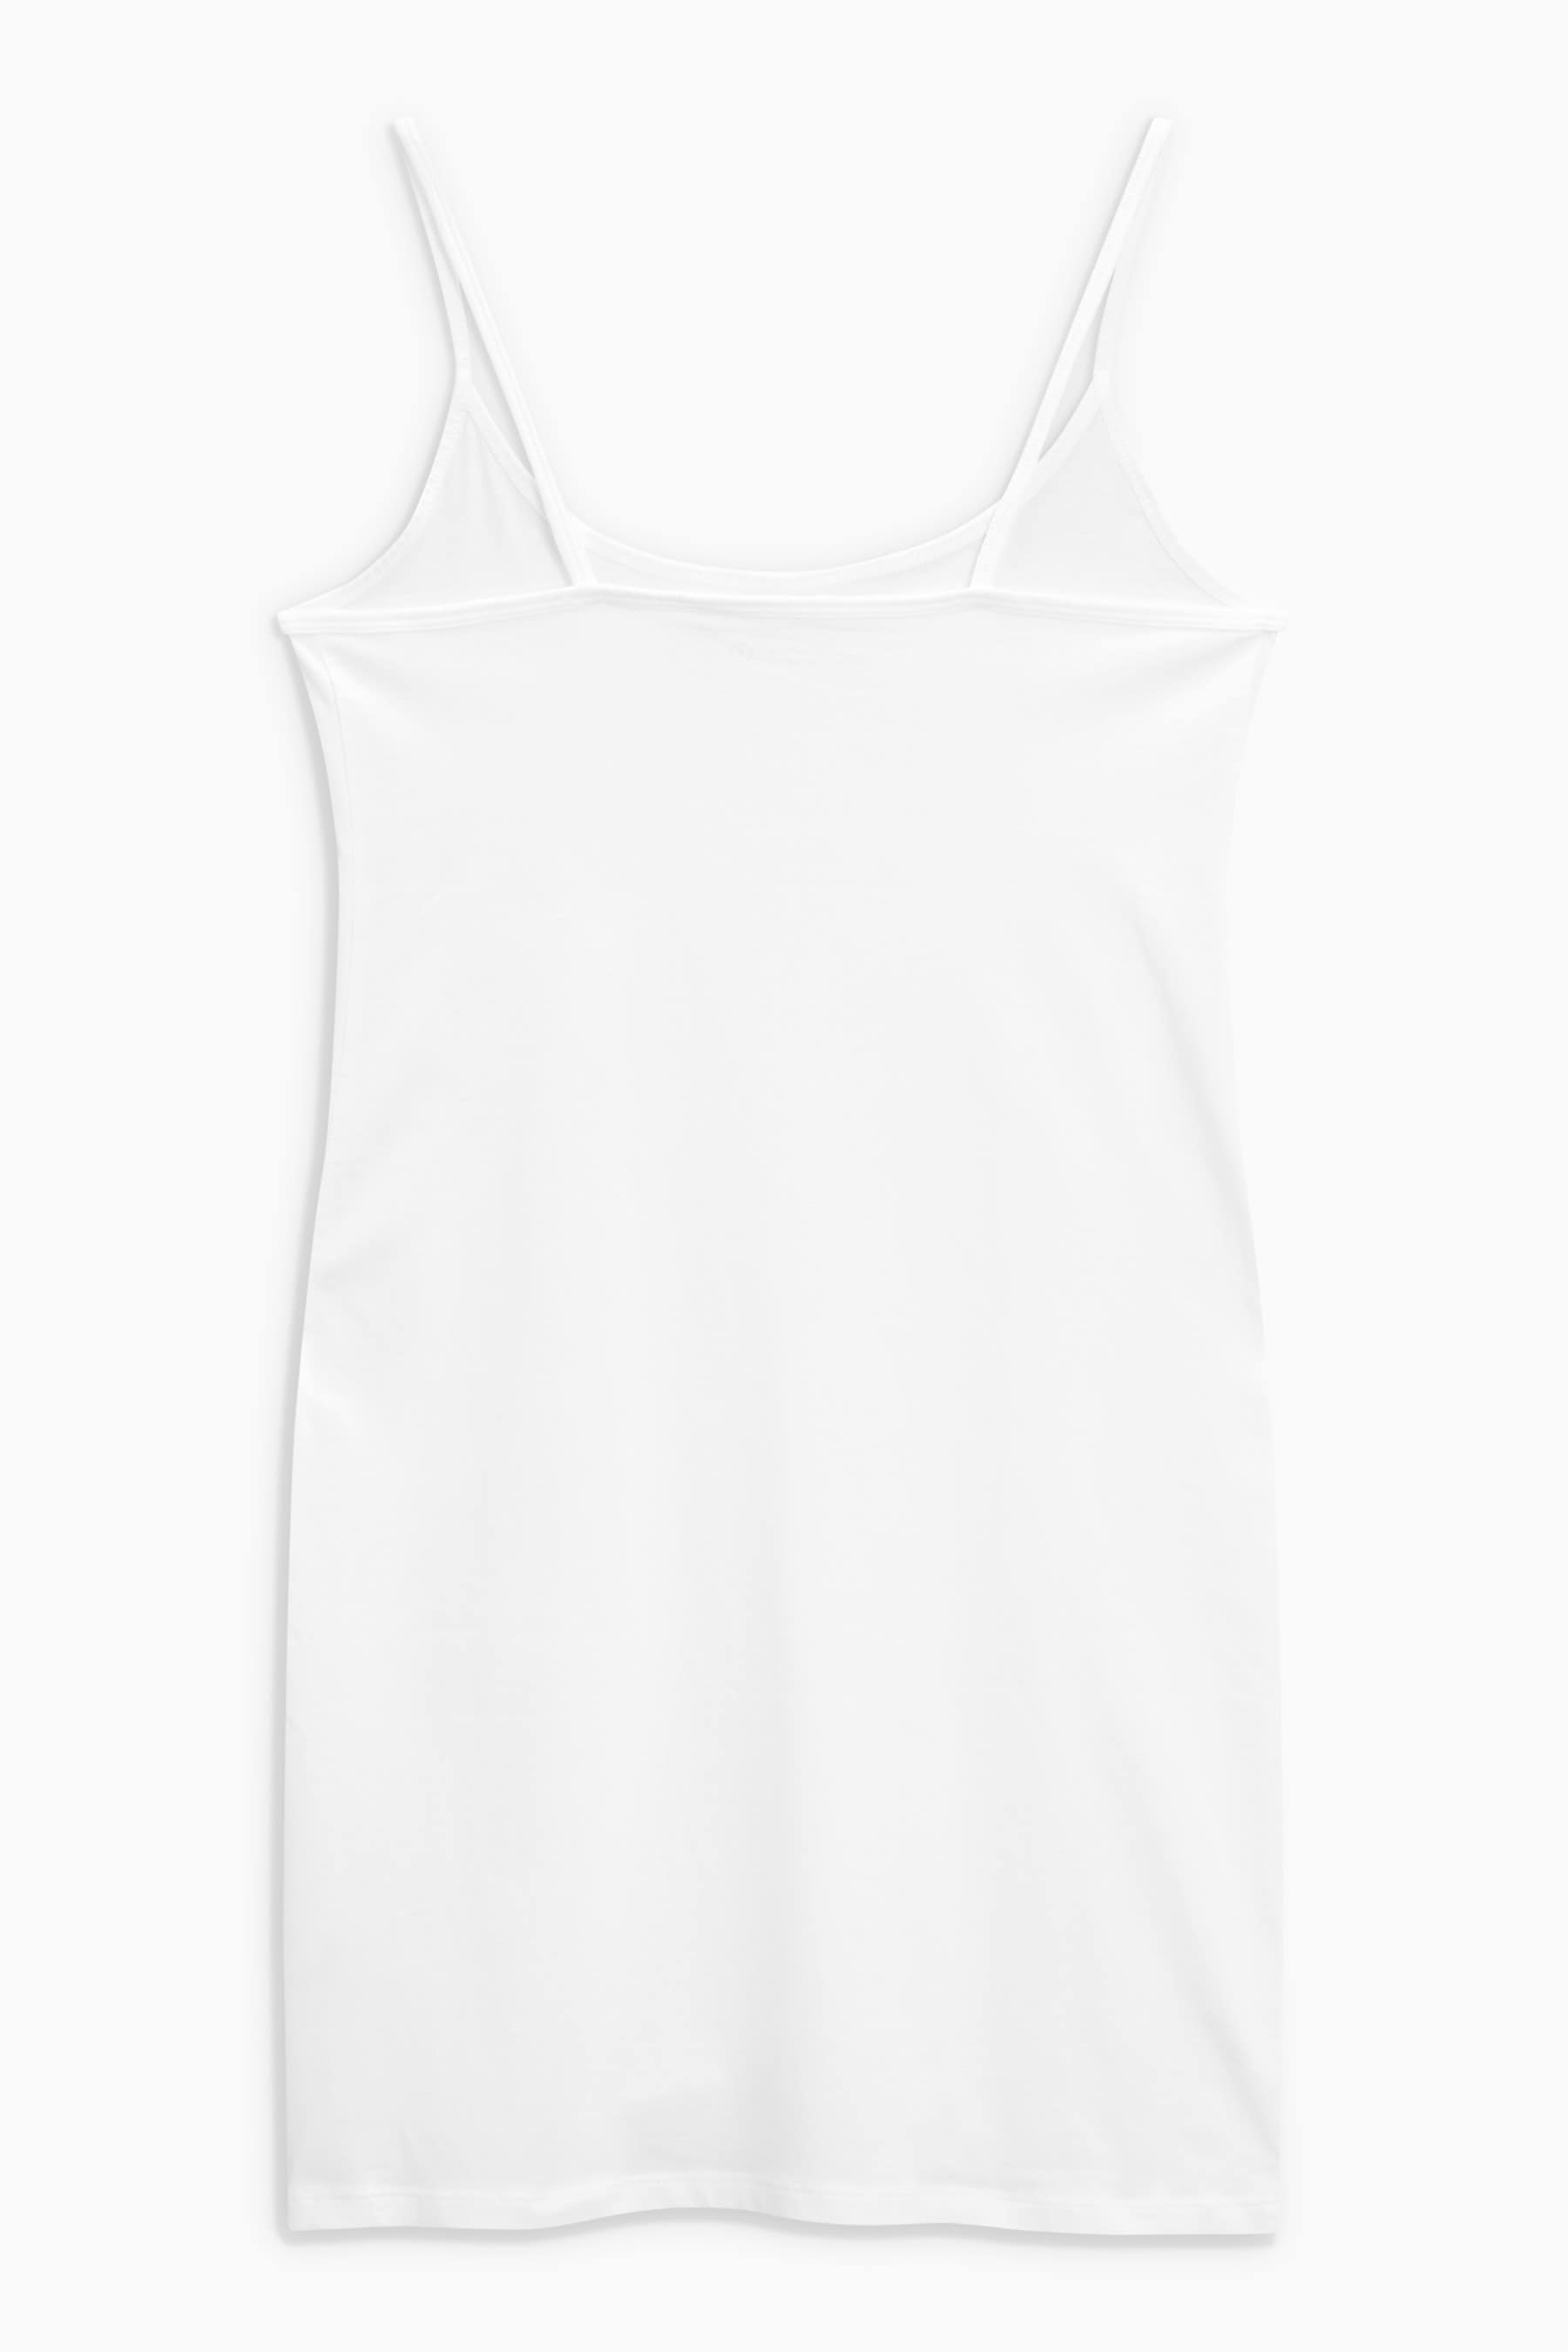 Buy White Longline Thin Strap Vest from the Next UK online shop